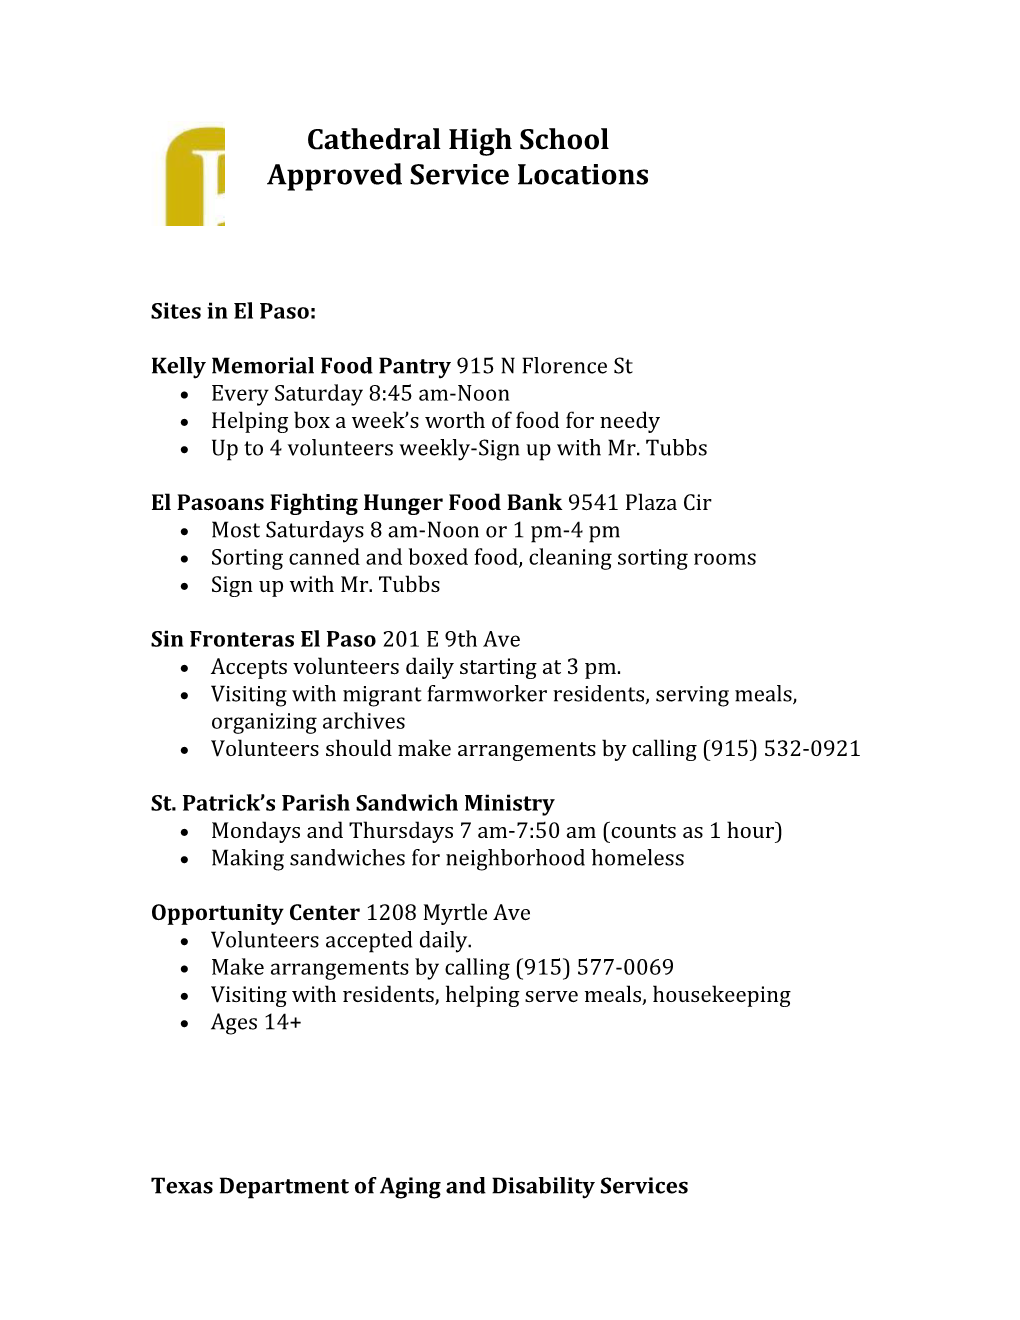 Approved Service Locations